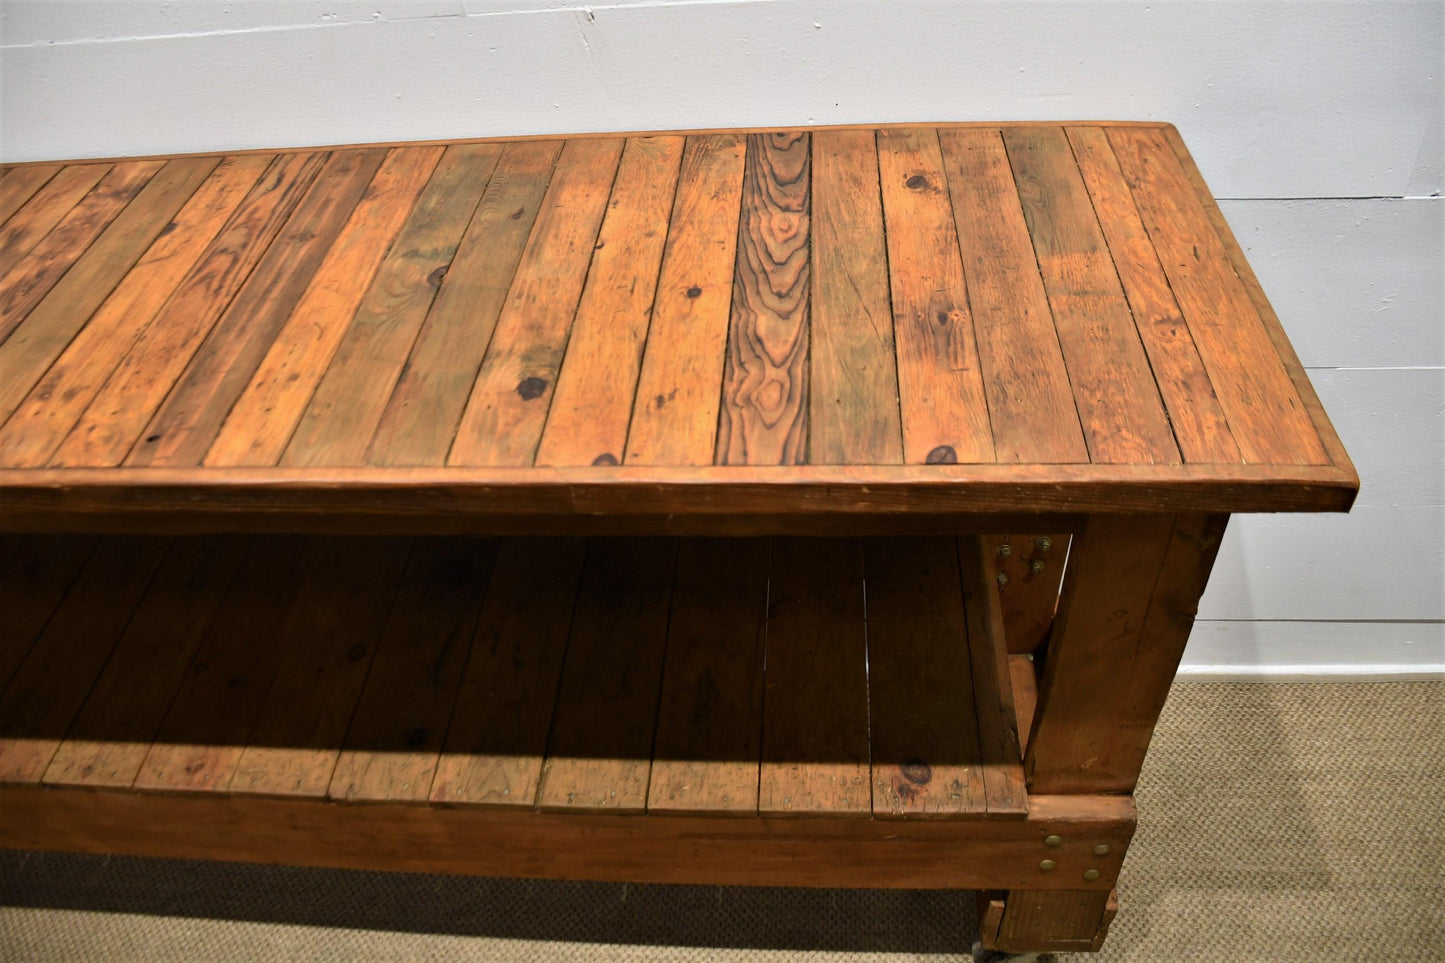 Long Wooden Work Table / Island with Storage Shelf